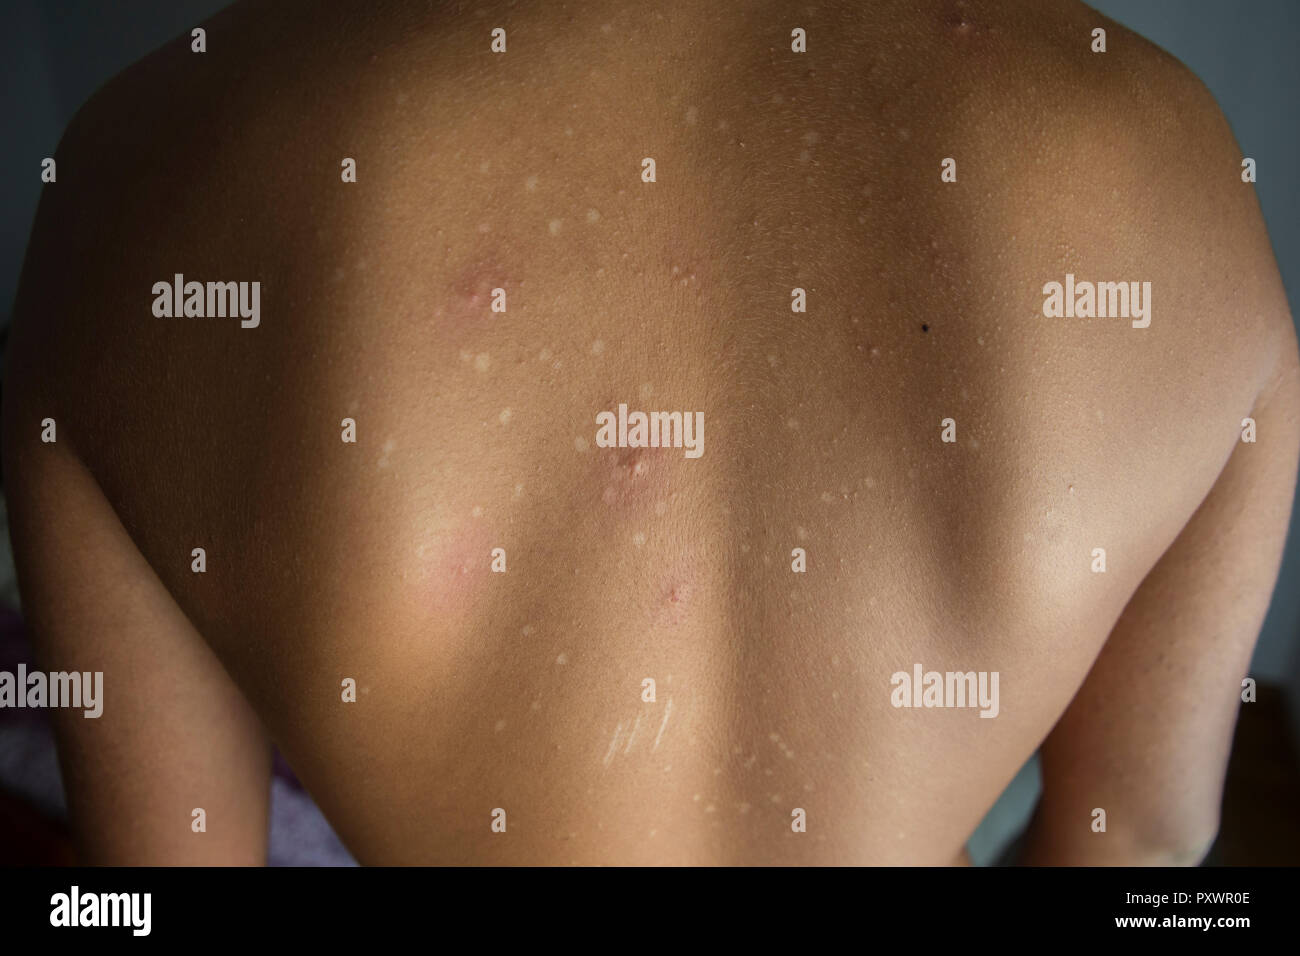 Psoriasis illness and autoimmune disease as dry red skin patches on a patient as a symbol for dermatology. Stock Photo